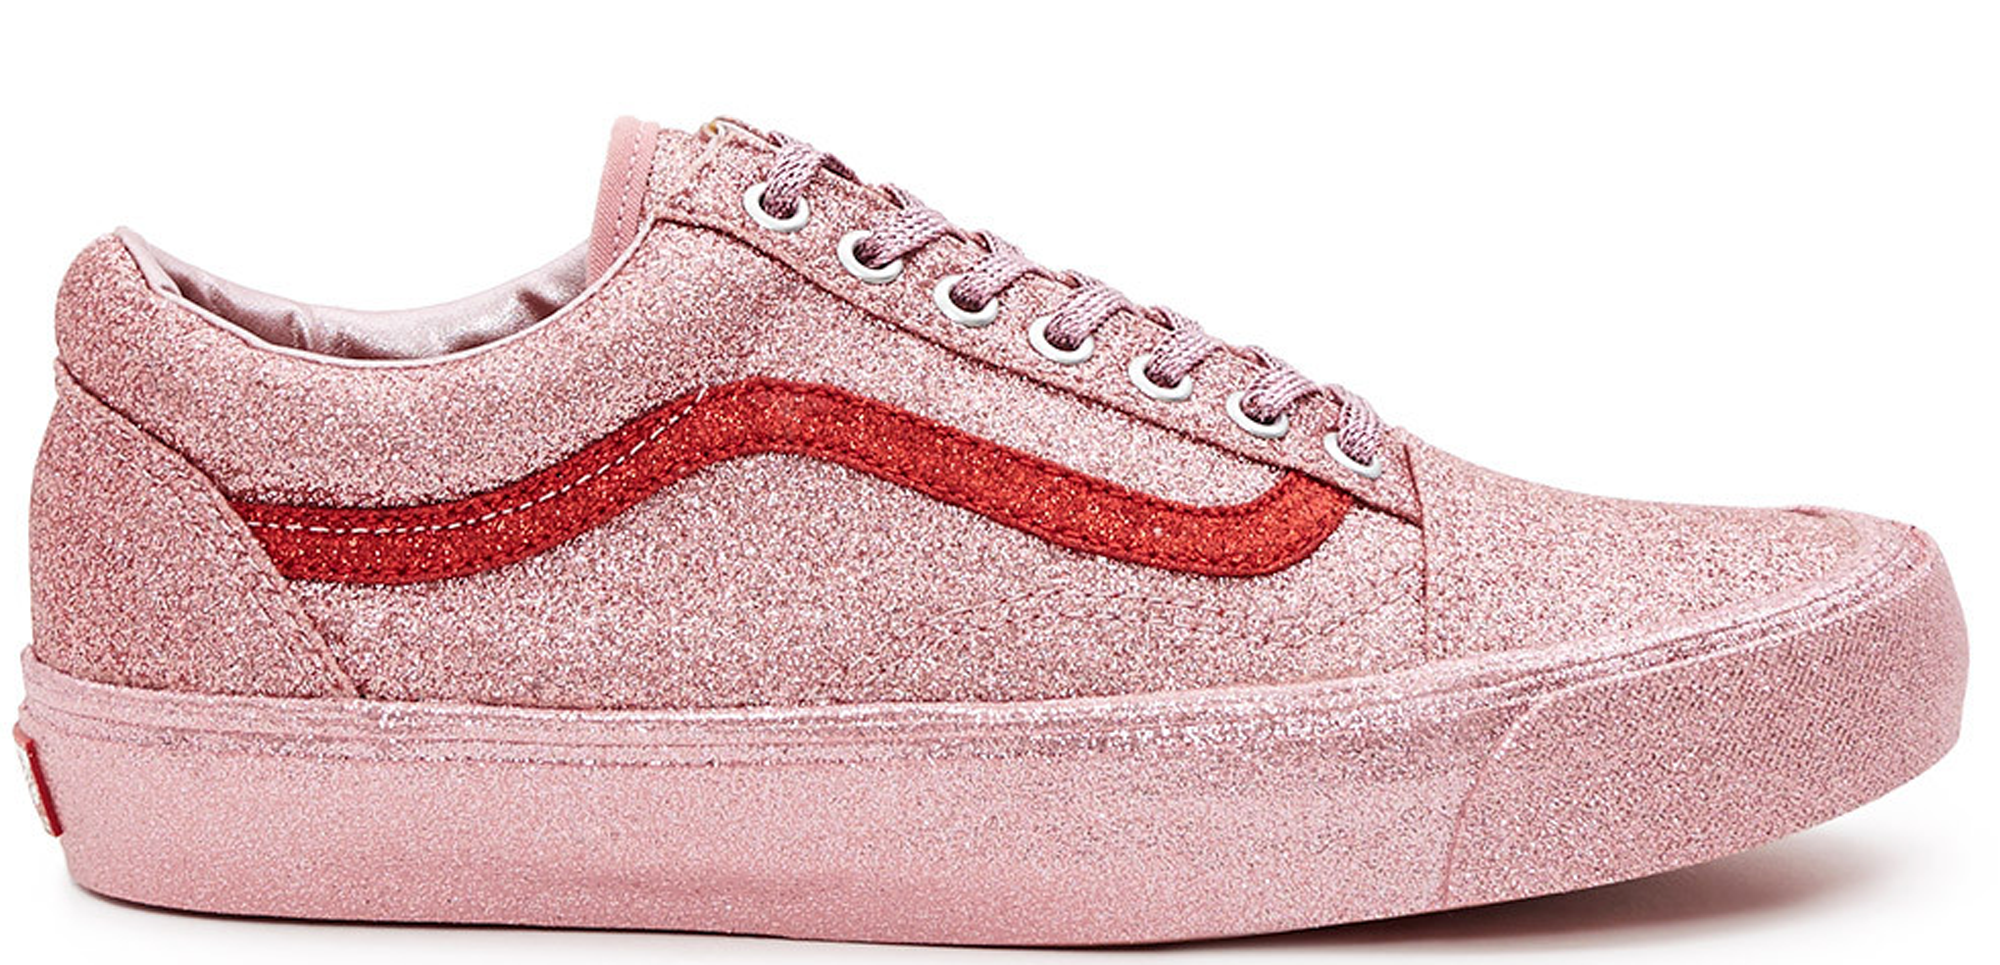 pink sparkly vans shoes